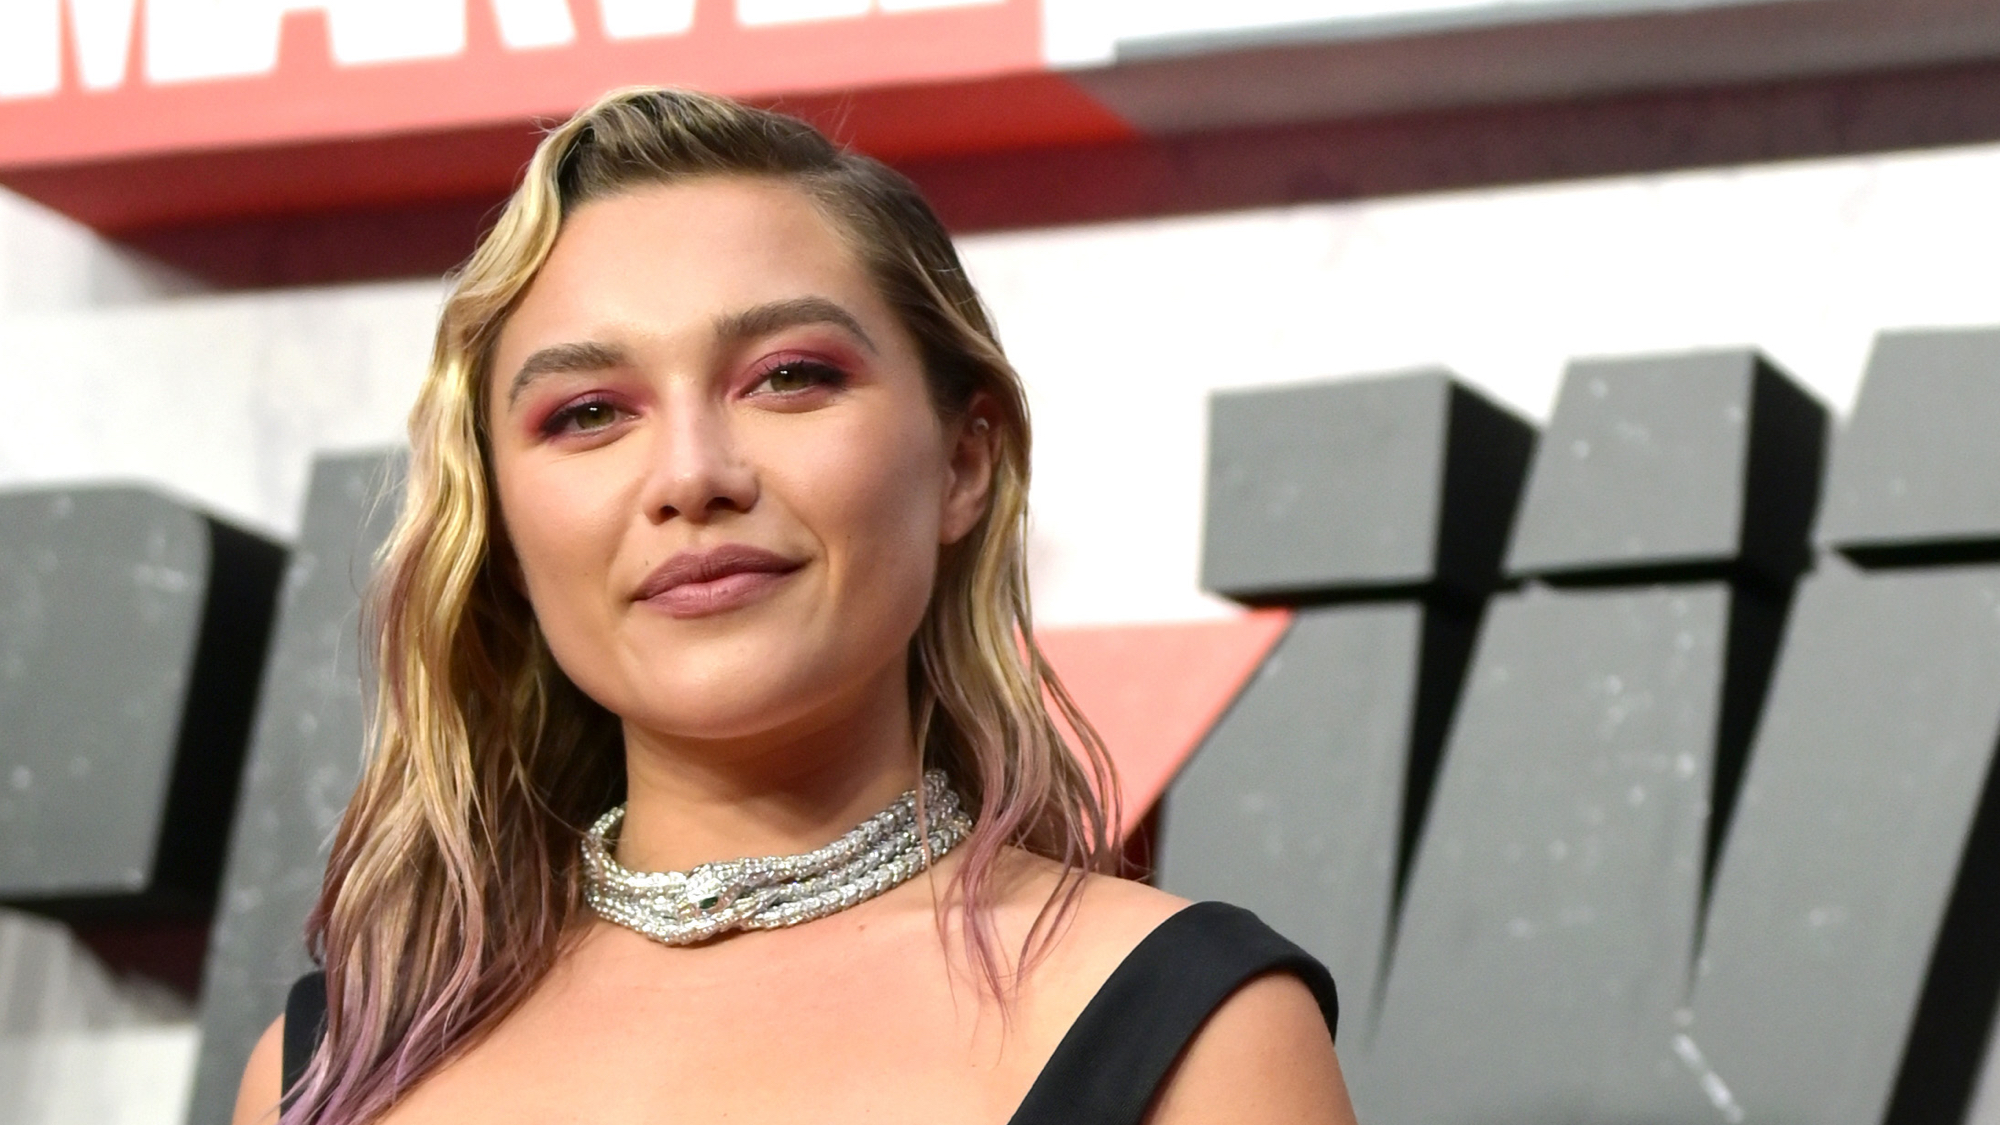 Actress Florence Pugh angered indie community by doing Marvel. “She’s gone forever,” she said.